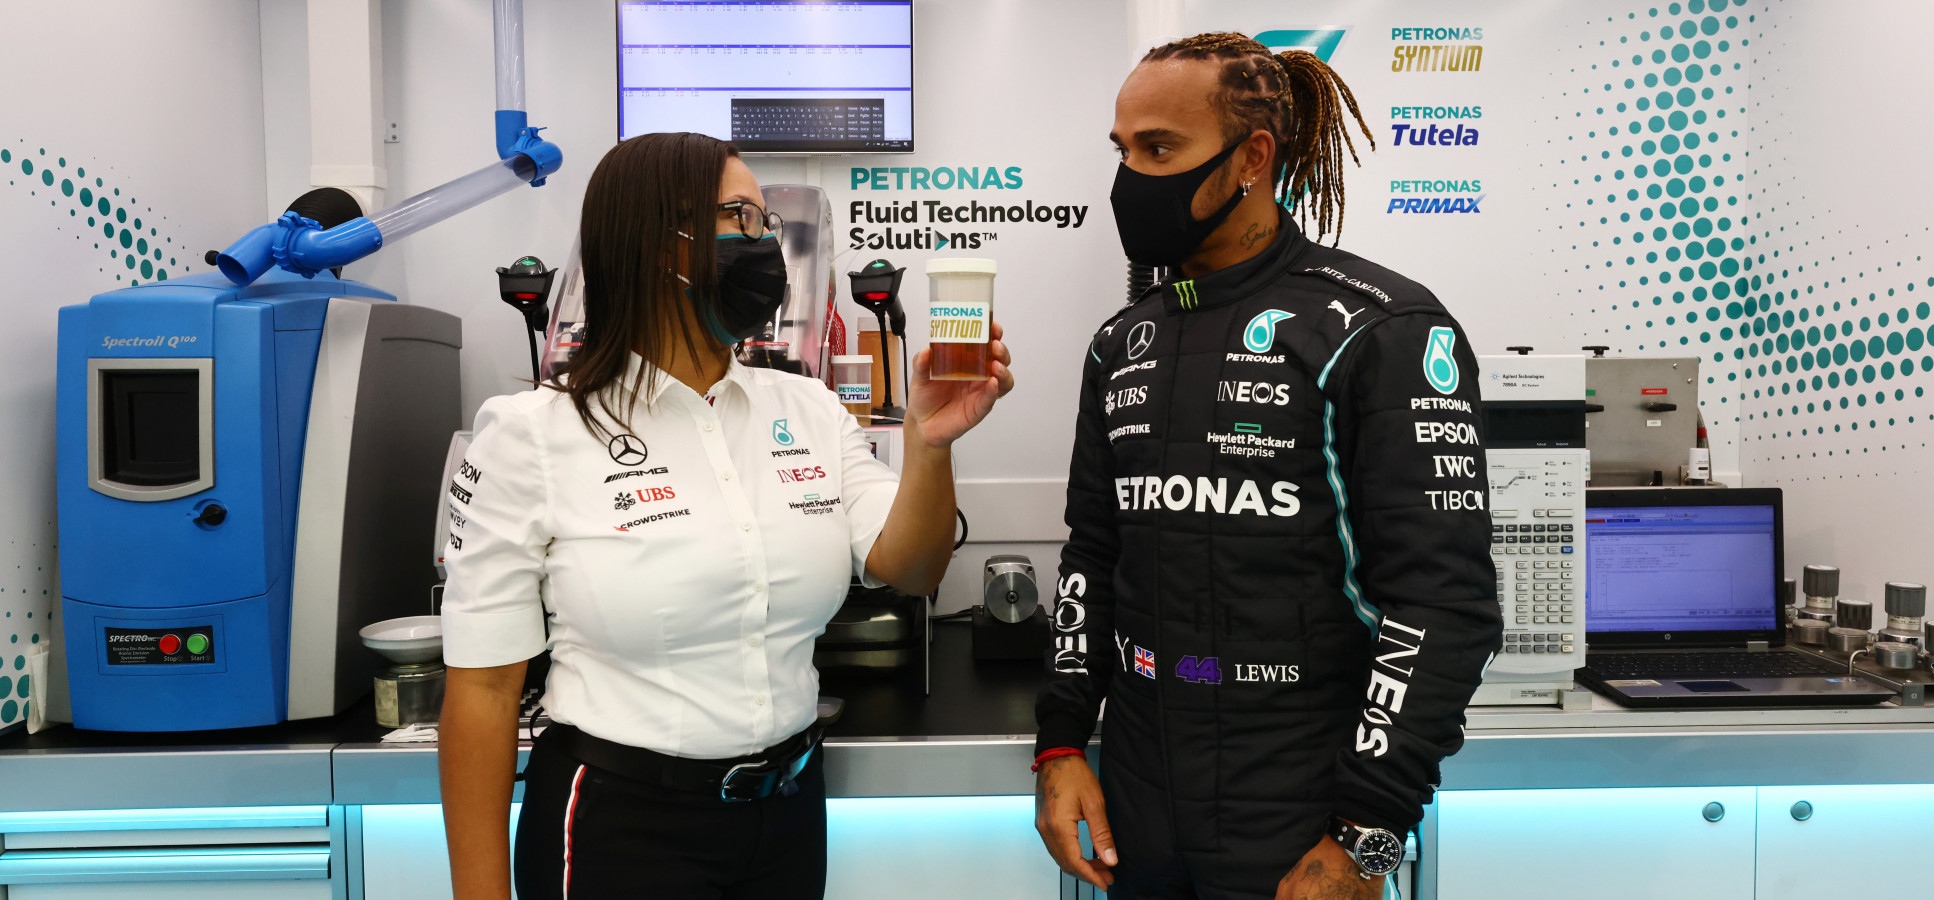 Stephanie Travers standing with F1 driver Lewis Hamilton